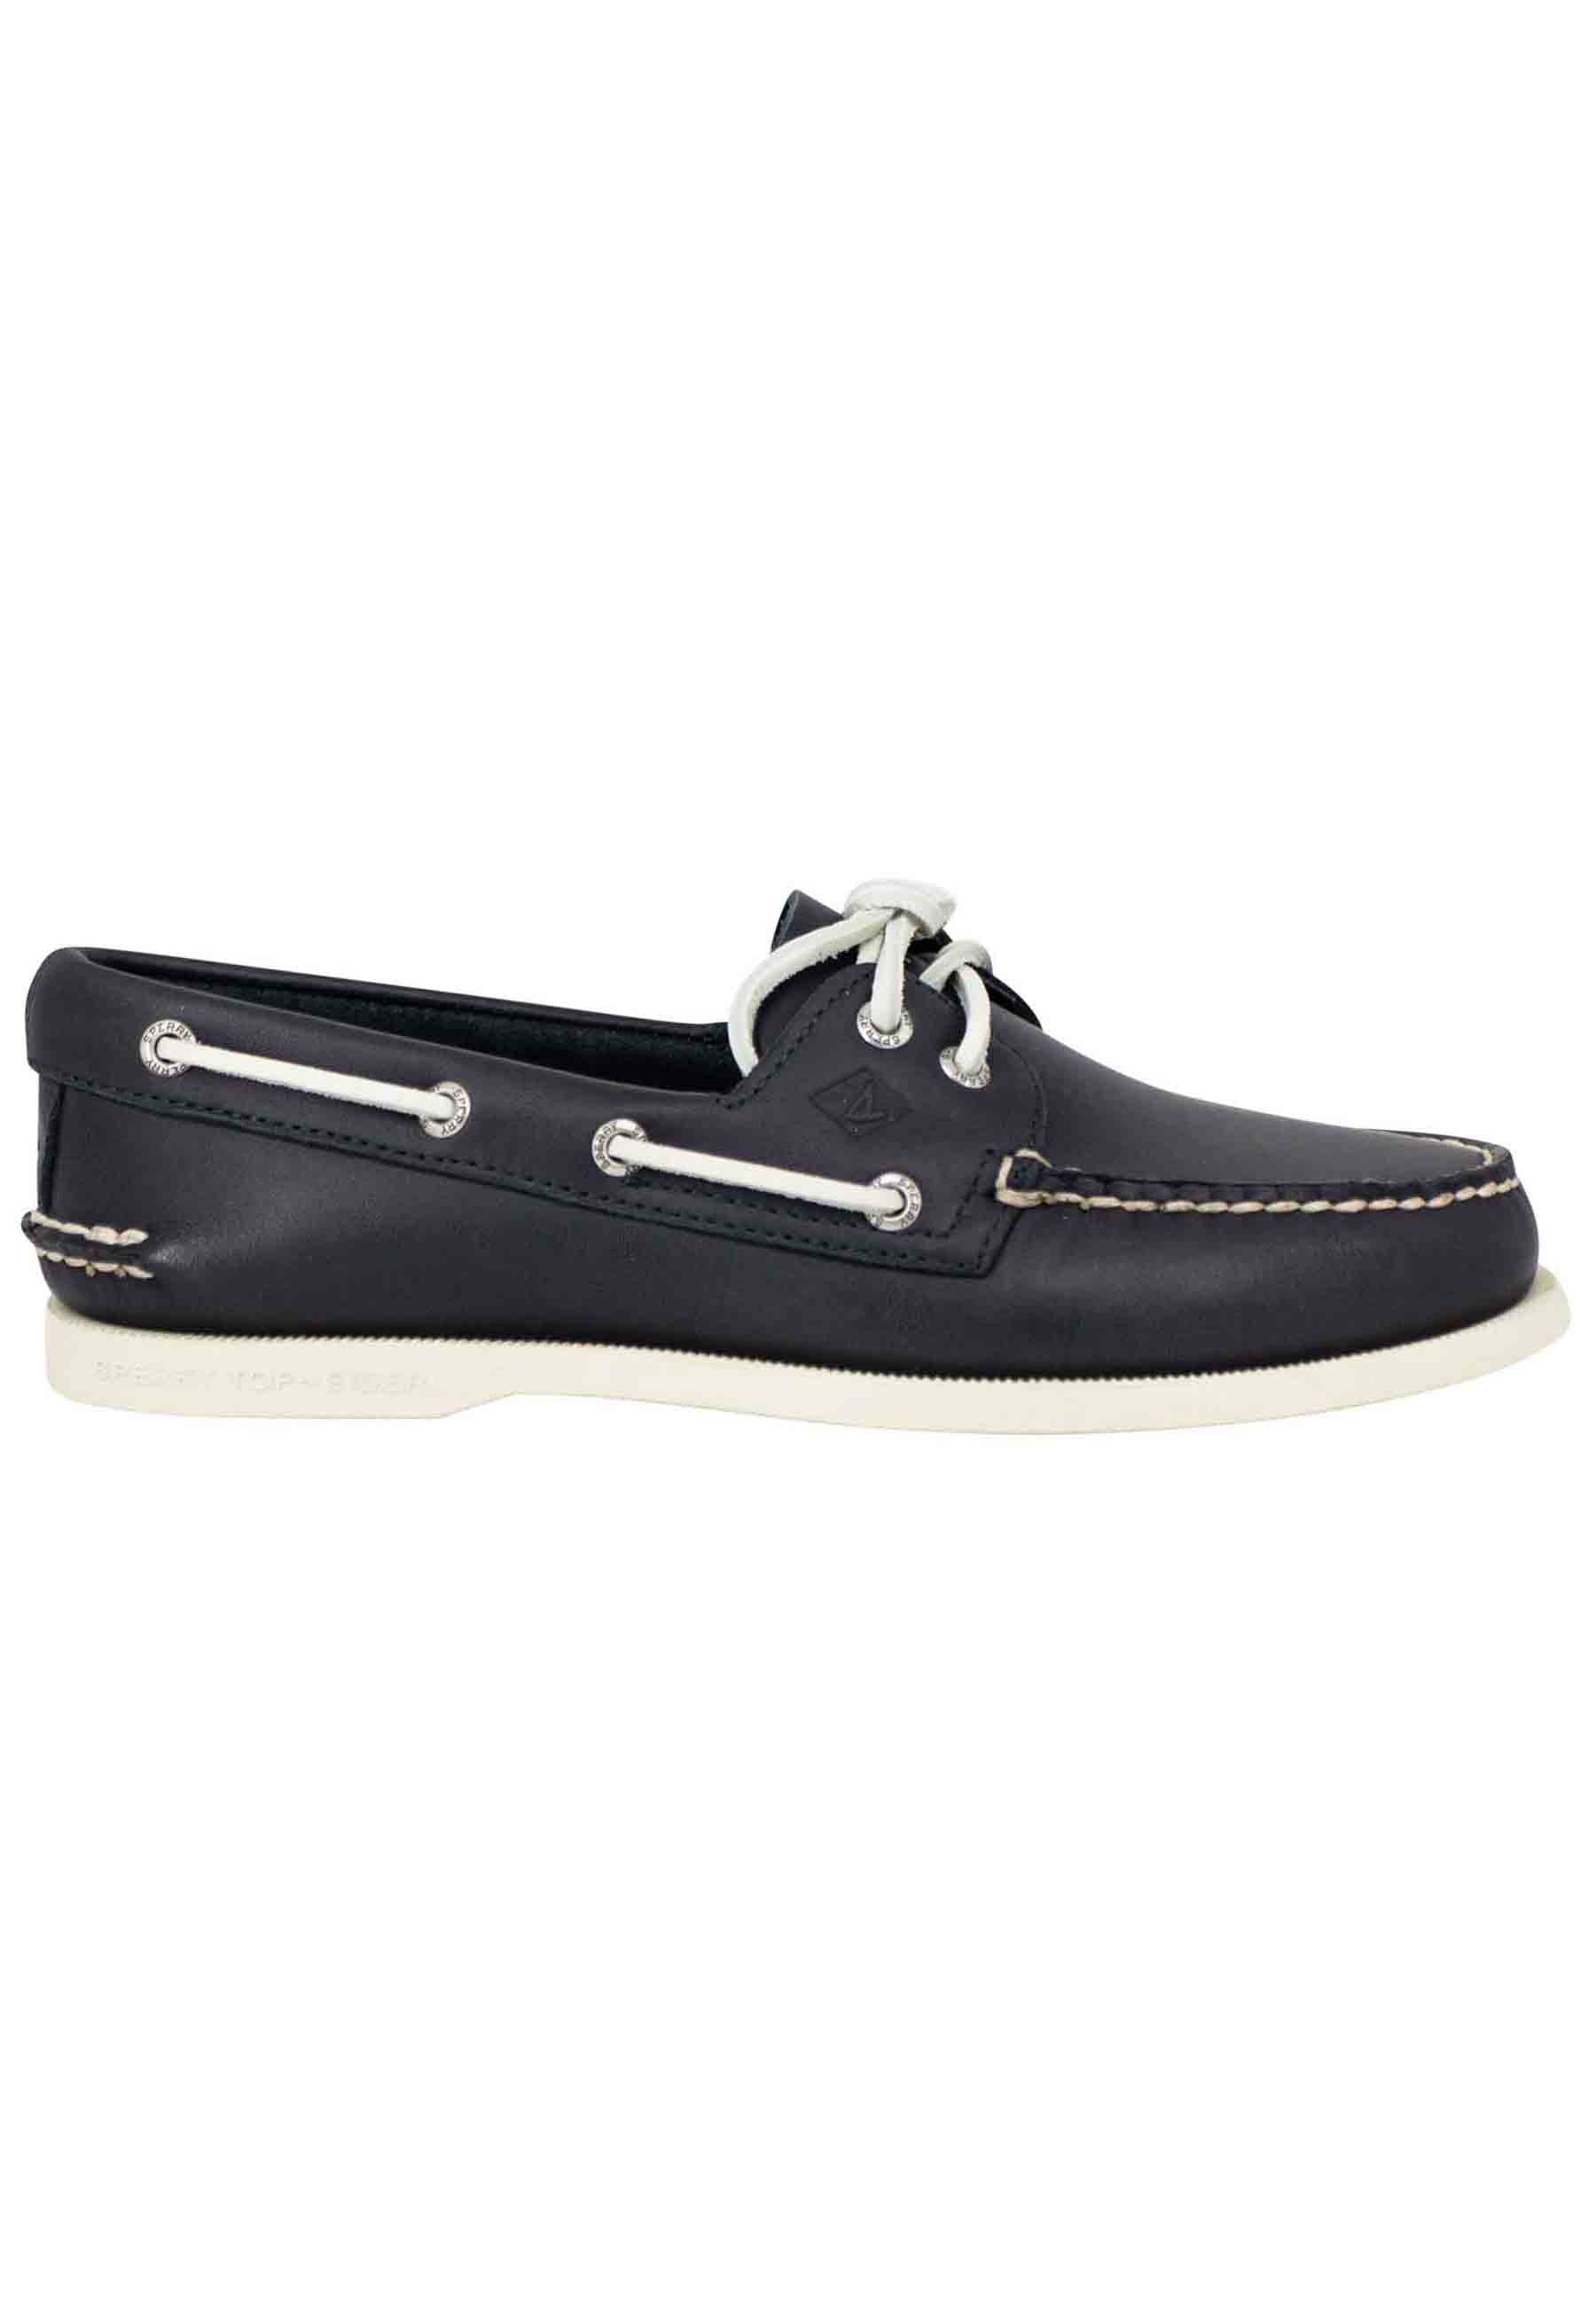 Top Sider men's loafers in blue leather with leather laces and white rubber sole